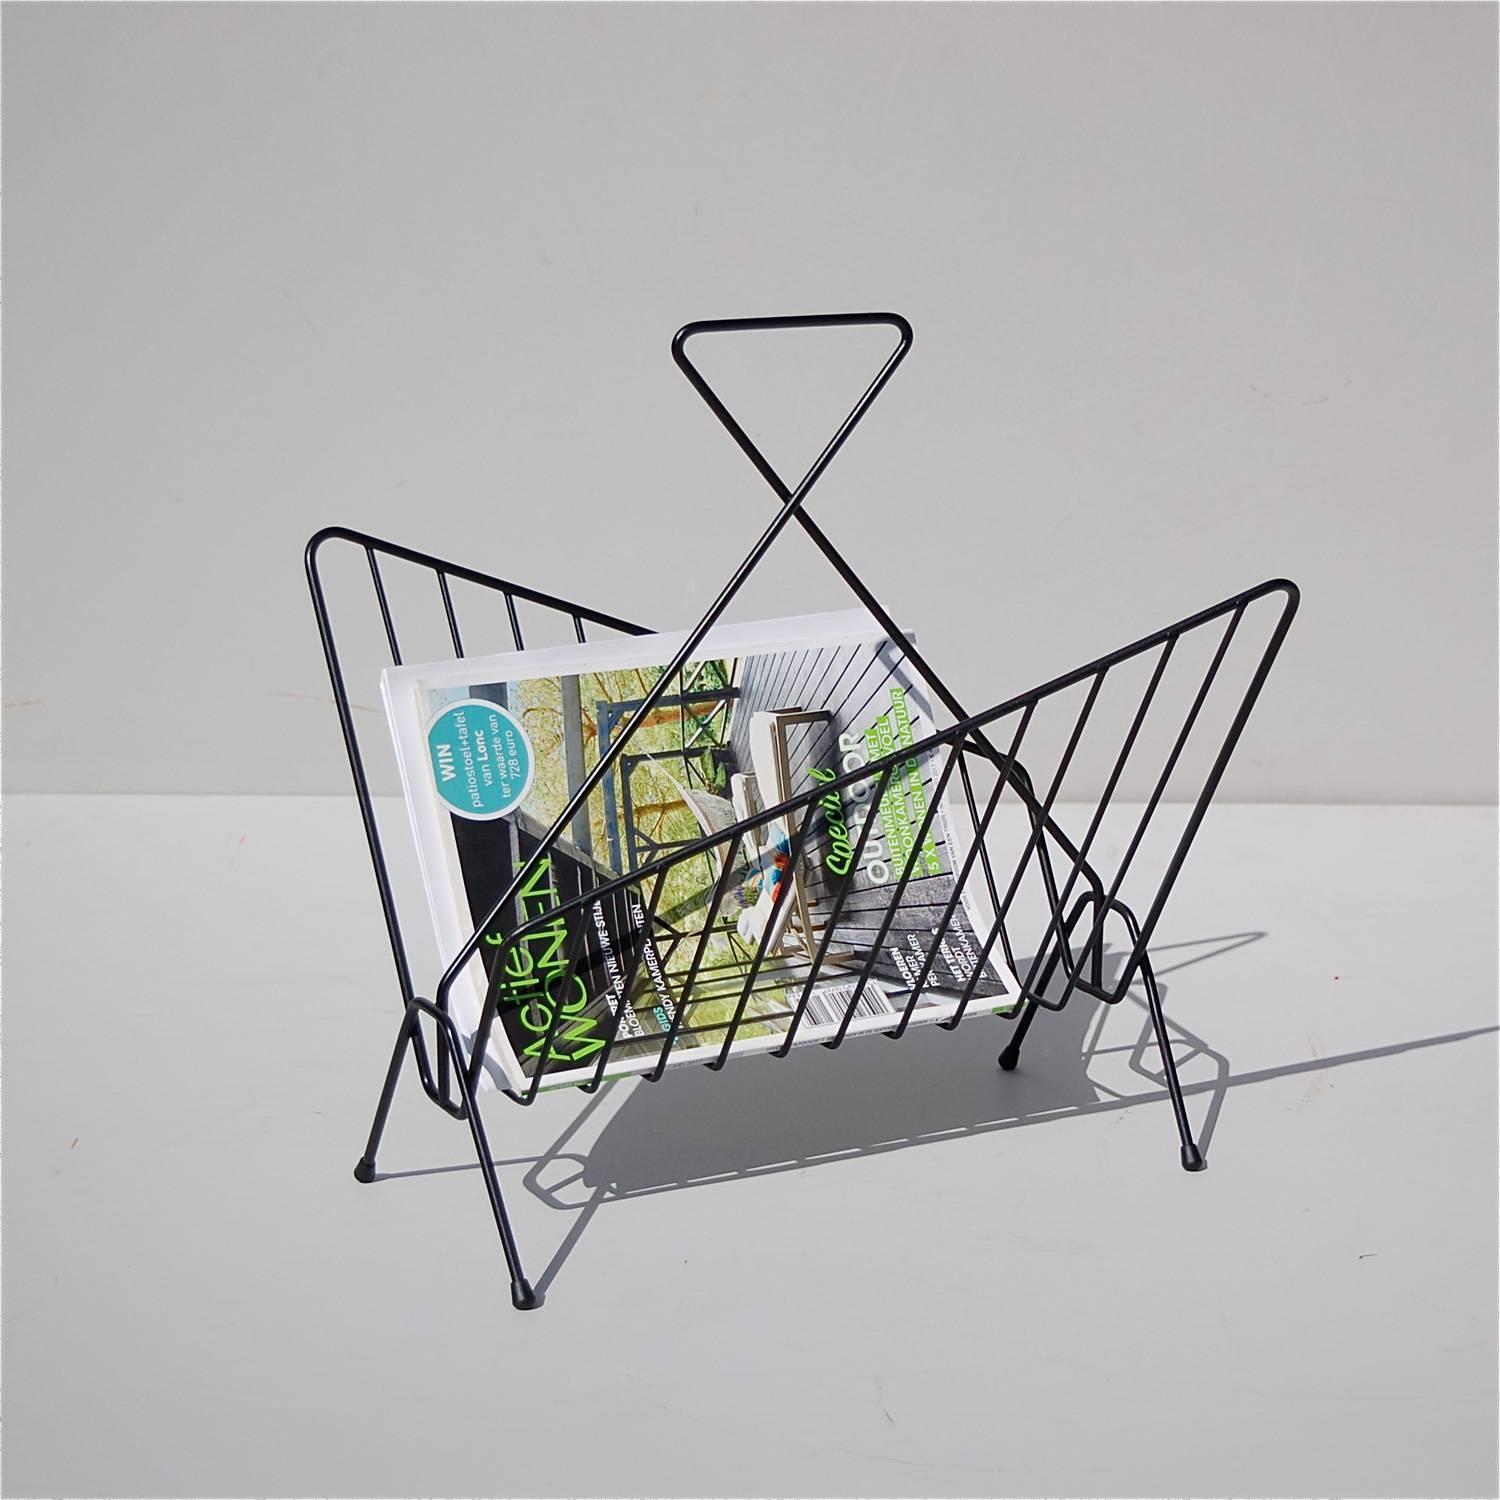 Mid-20th century geometric shaped magazine rack or newspaper holder in black lacquered metal. The trapezium shape of the side supports is identical, but in mirror image of each other. This creates a visually interesting and eye-catching effect. The